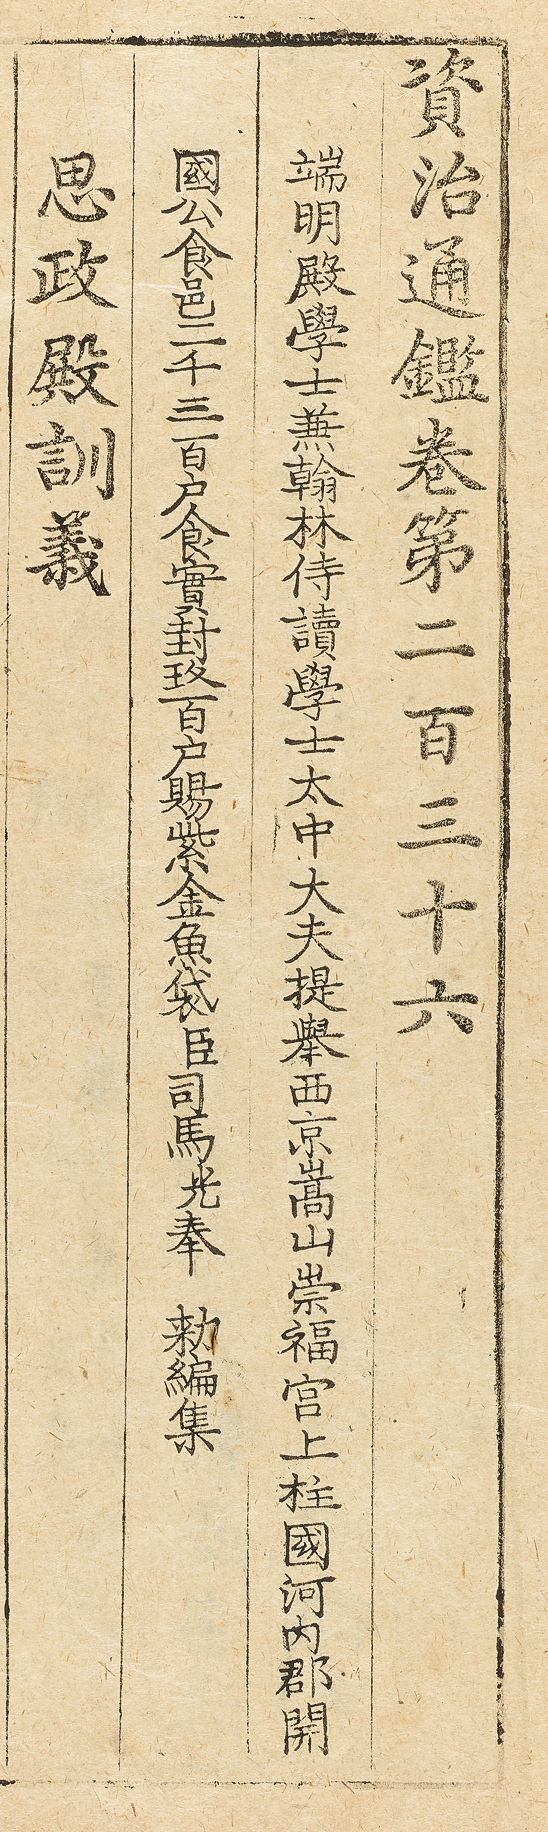 Beginning of the first page, Sajeongjeon Edition of The Annotated Zizhi Tongjian, edited and published by King Sejong, 1436, 27.7 x 14.7 cm, Treasure 1281-1 (National Museum of Korea)